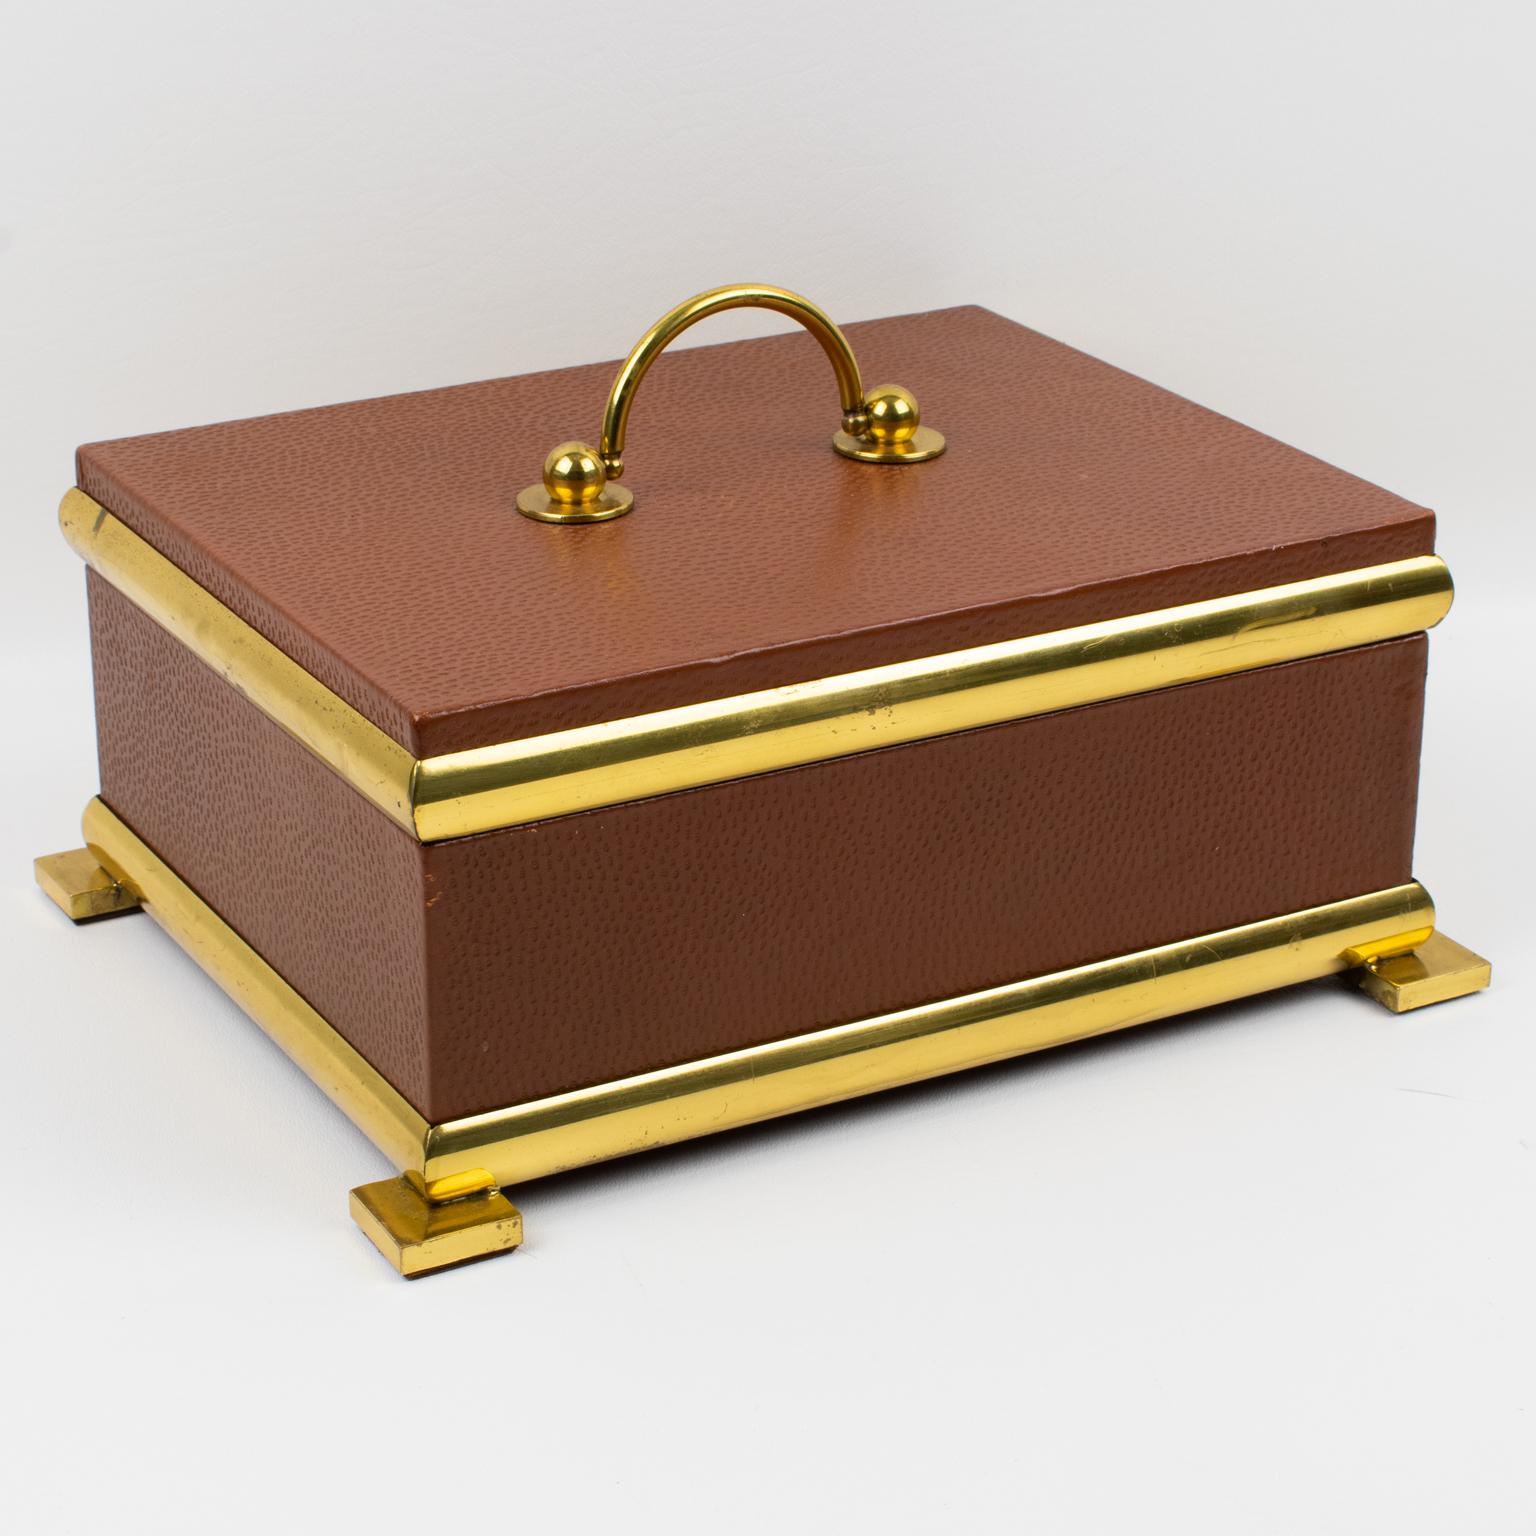 This stylish 1950s Italian decorative lidded box has an Empire-revival flair. The tall rectangular shape boasts a classic modernist design, with gilded brass metal framing over a wood body wrapped with dark cognac brown leather. The quality interior